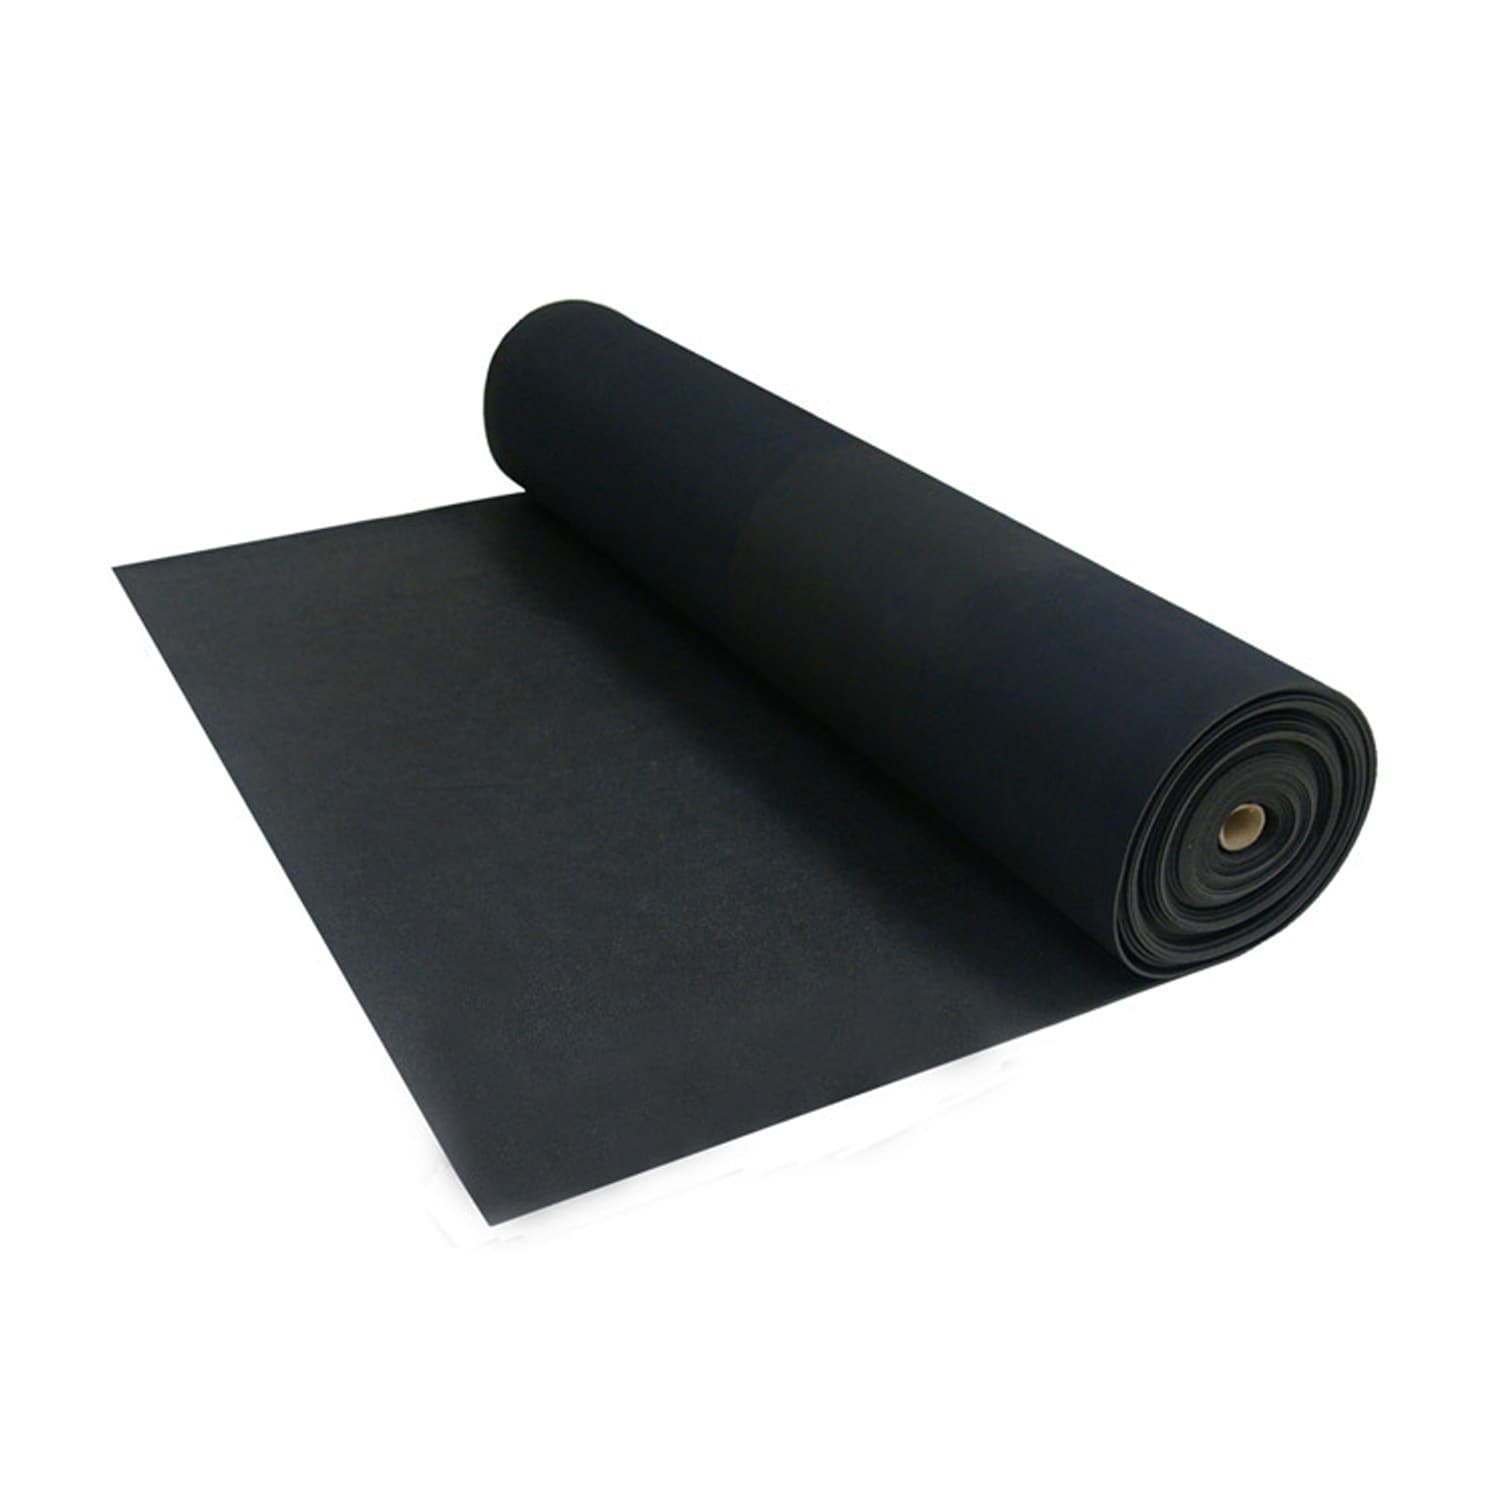 Gym Rubber Roll - Rubber Flooring Rolls Wholesaler by gym mats - Issuu